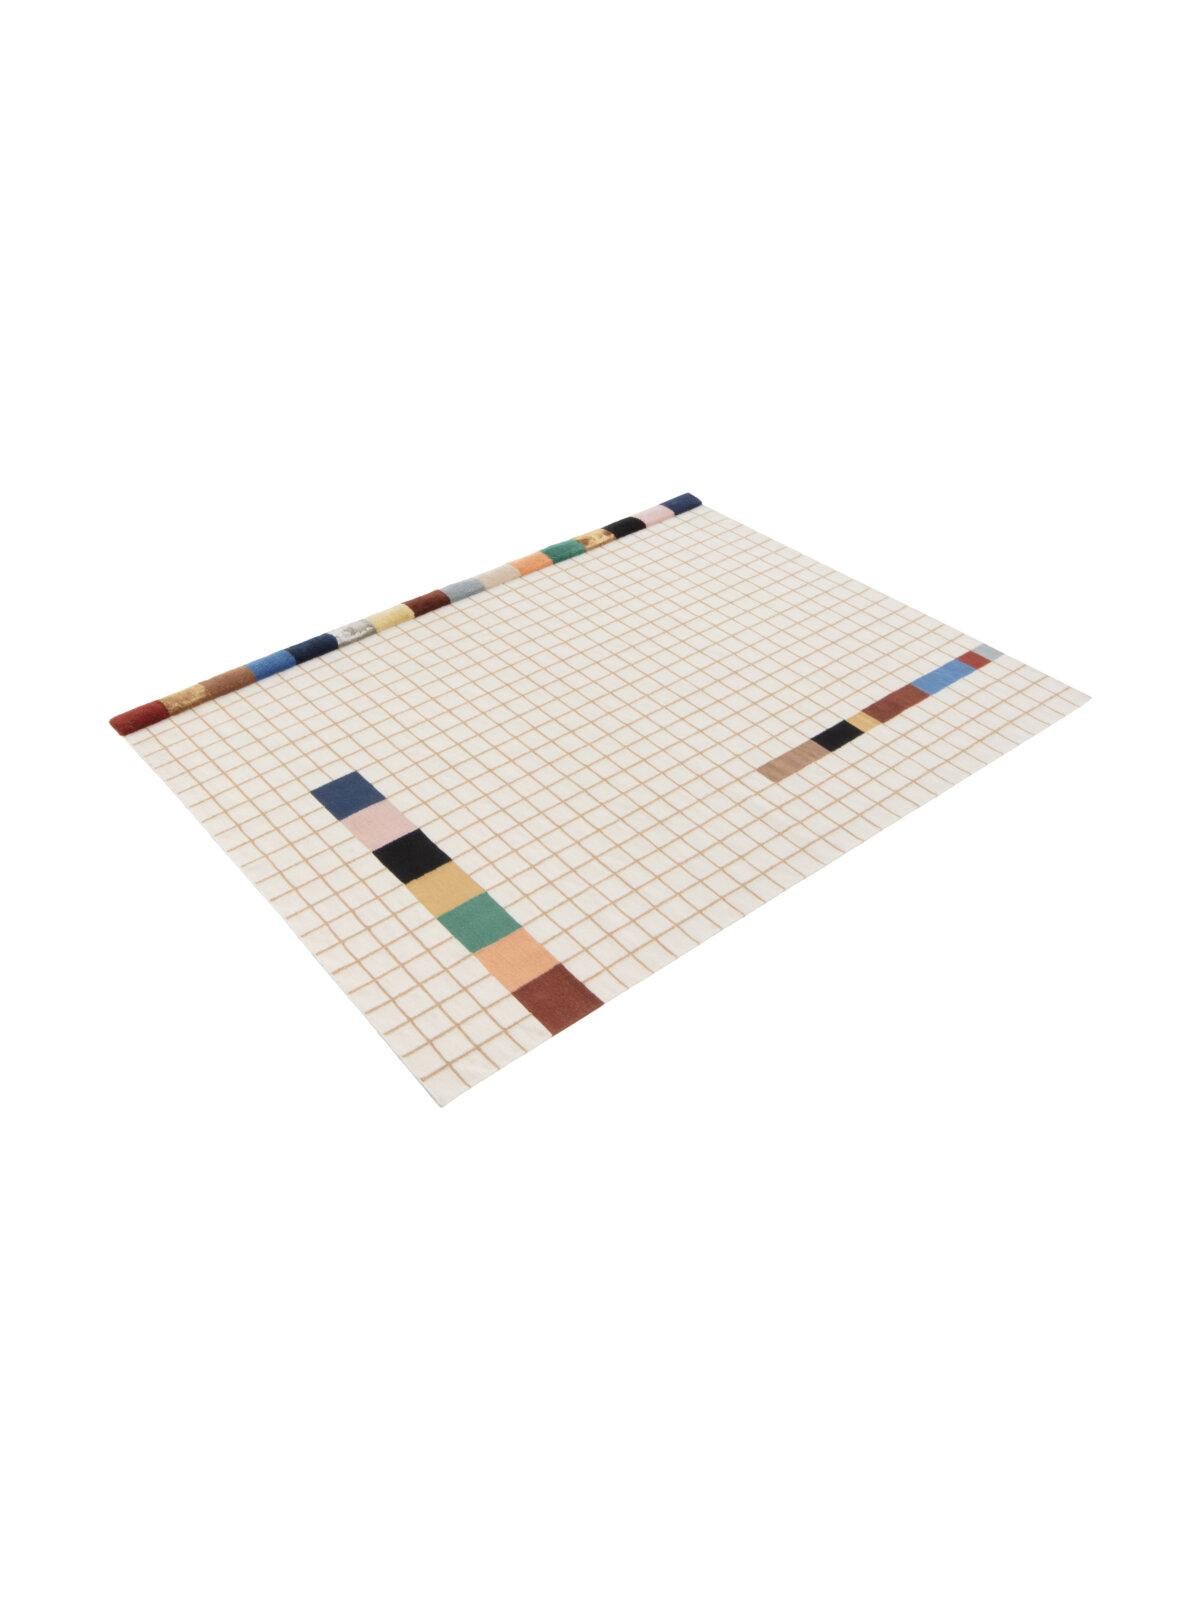 Indian cc-tapis Raag Collection - RAAG RECTANGULAR GRID 2 handmade rug by  Doshi Levien For Sale